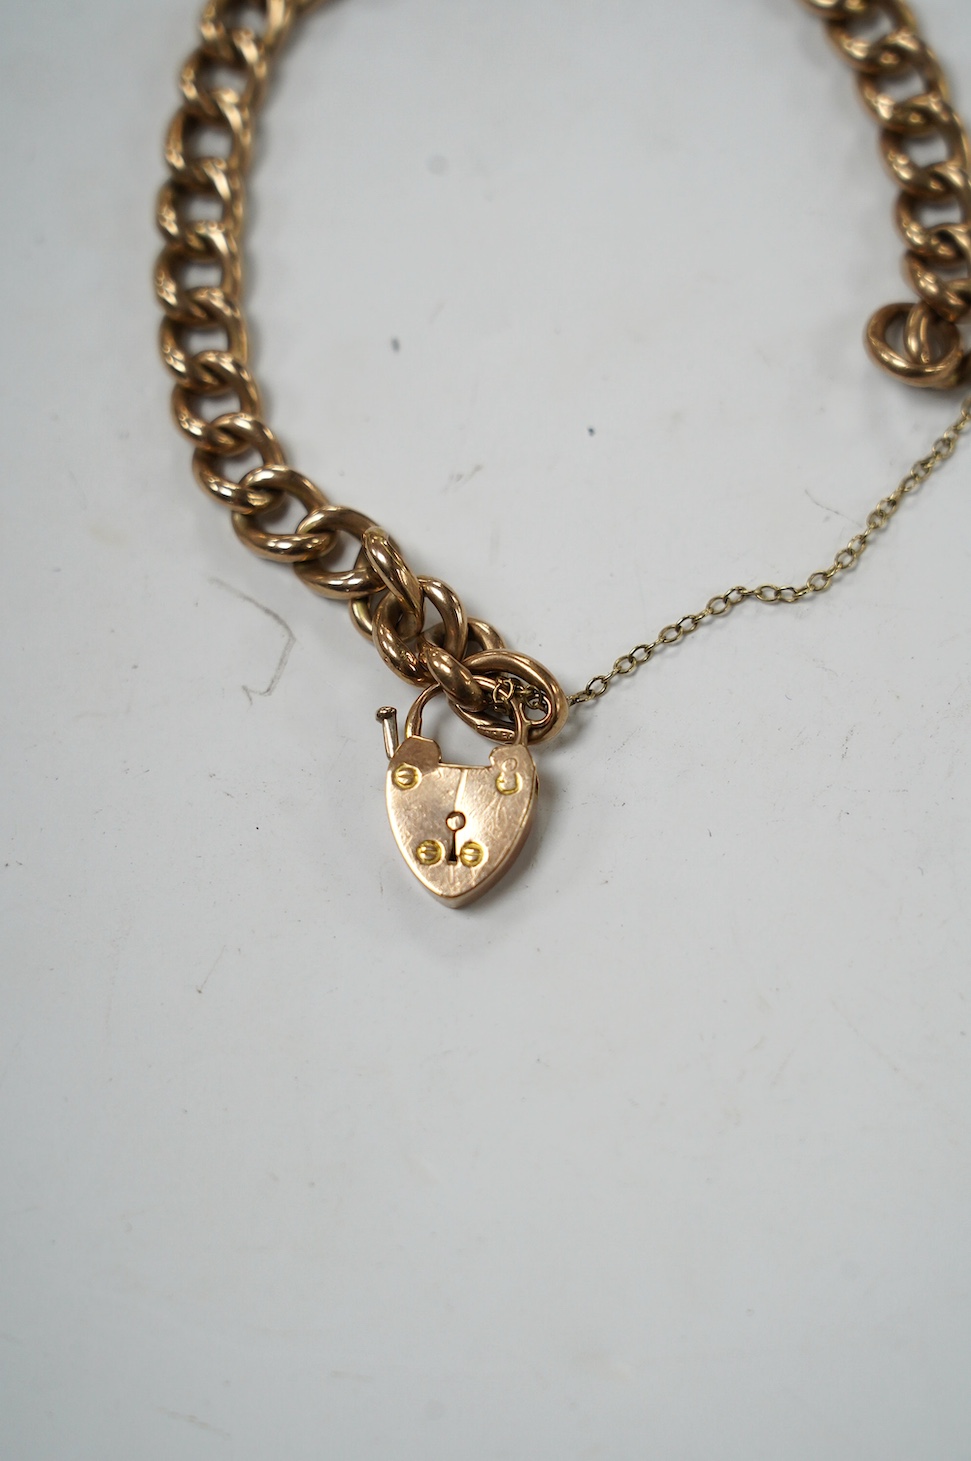 An early 20th century 9ct curb link bracelet, with heart shaped padlock clasp, 18cm, 13.6 grams. Condition - fair